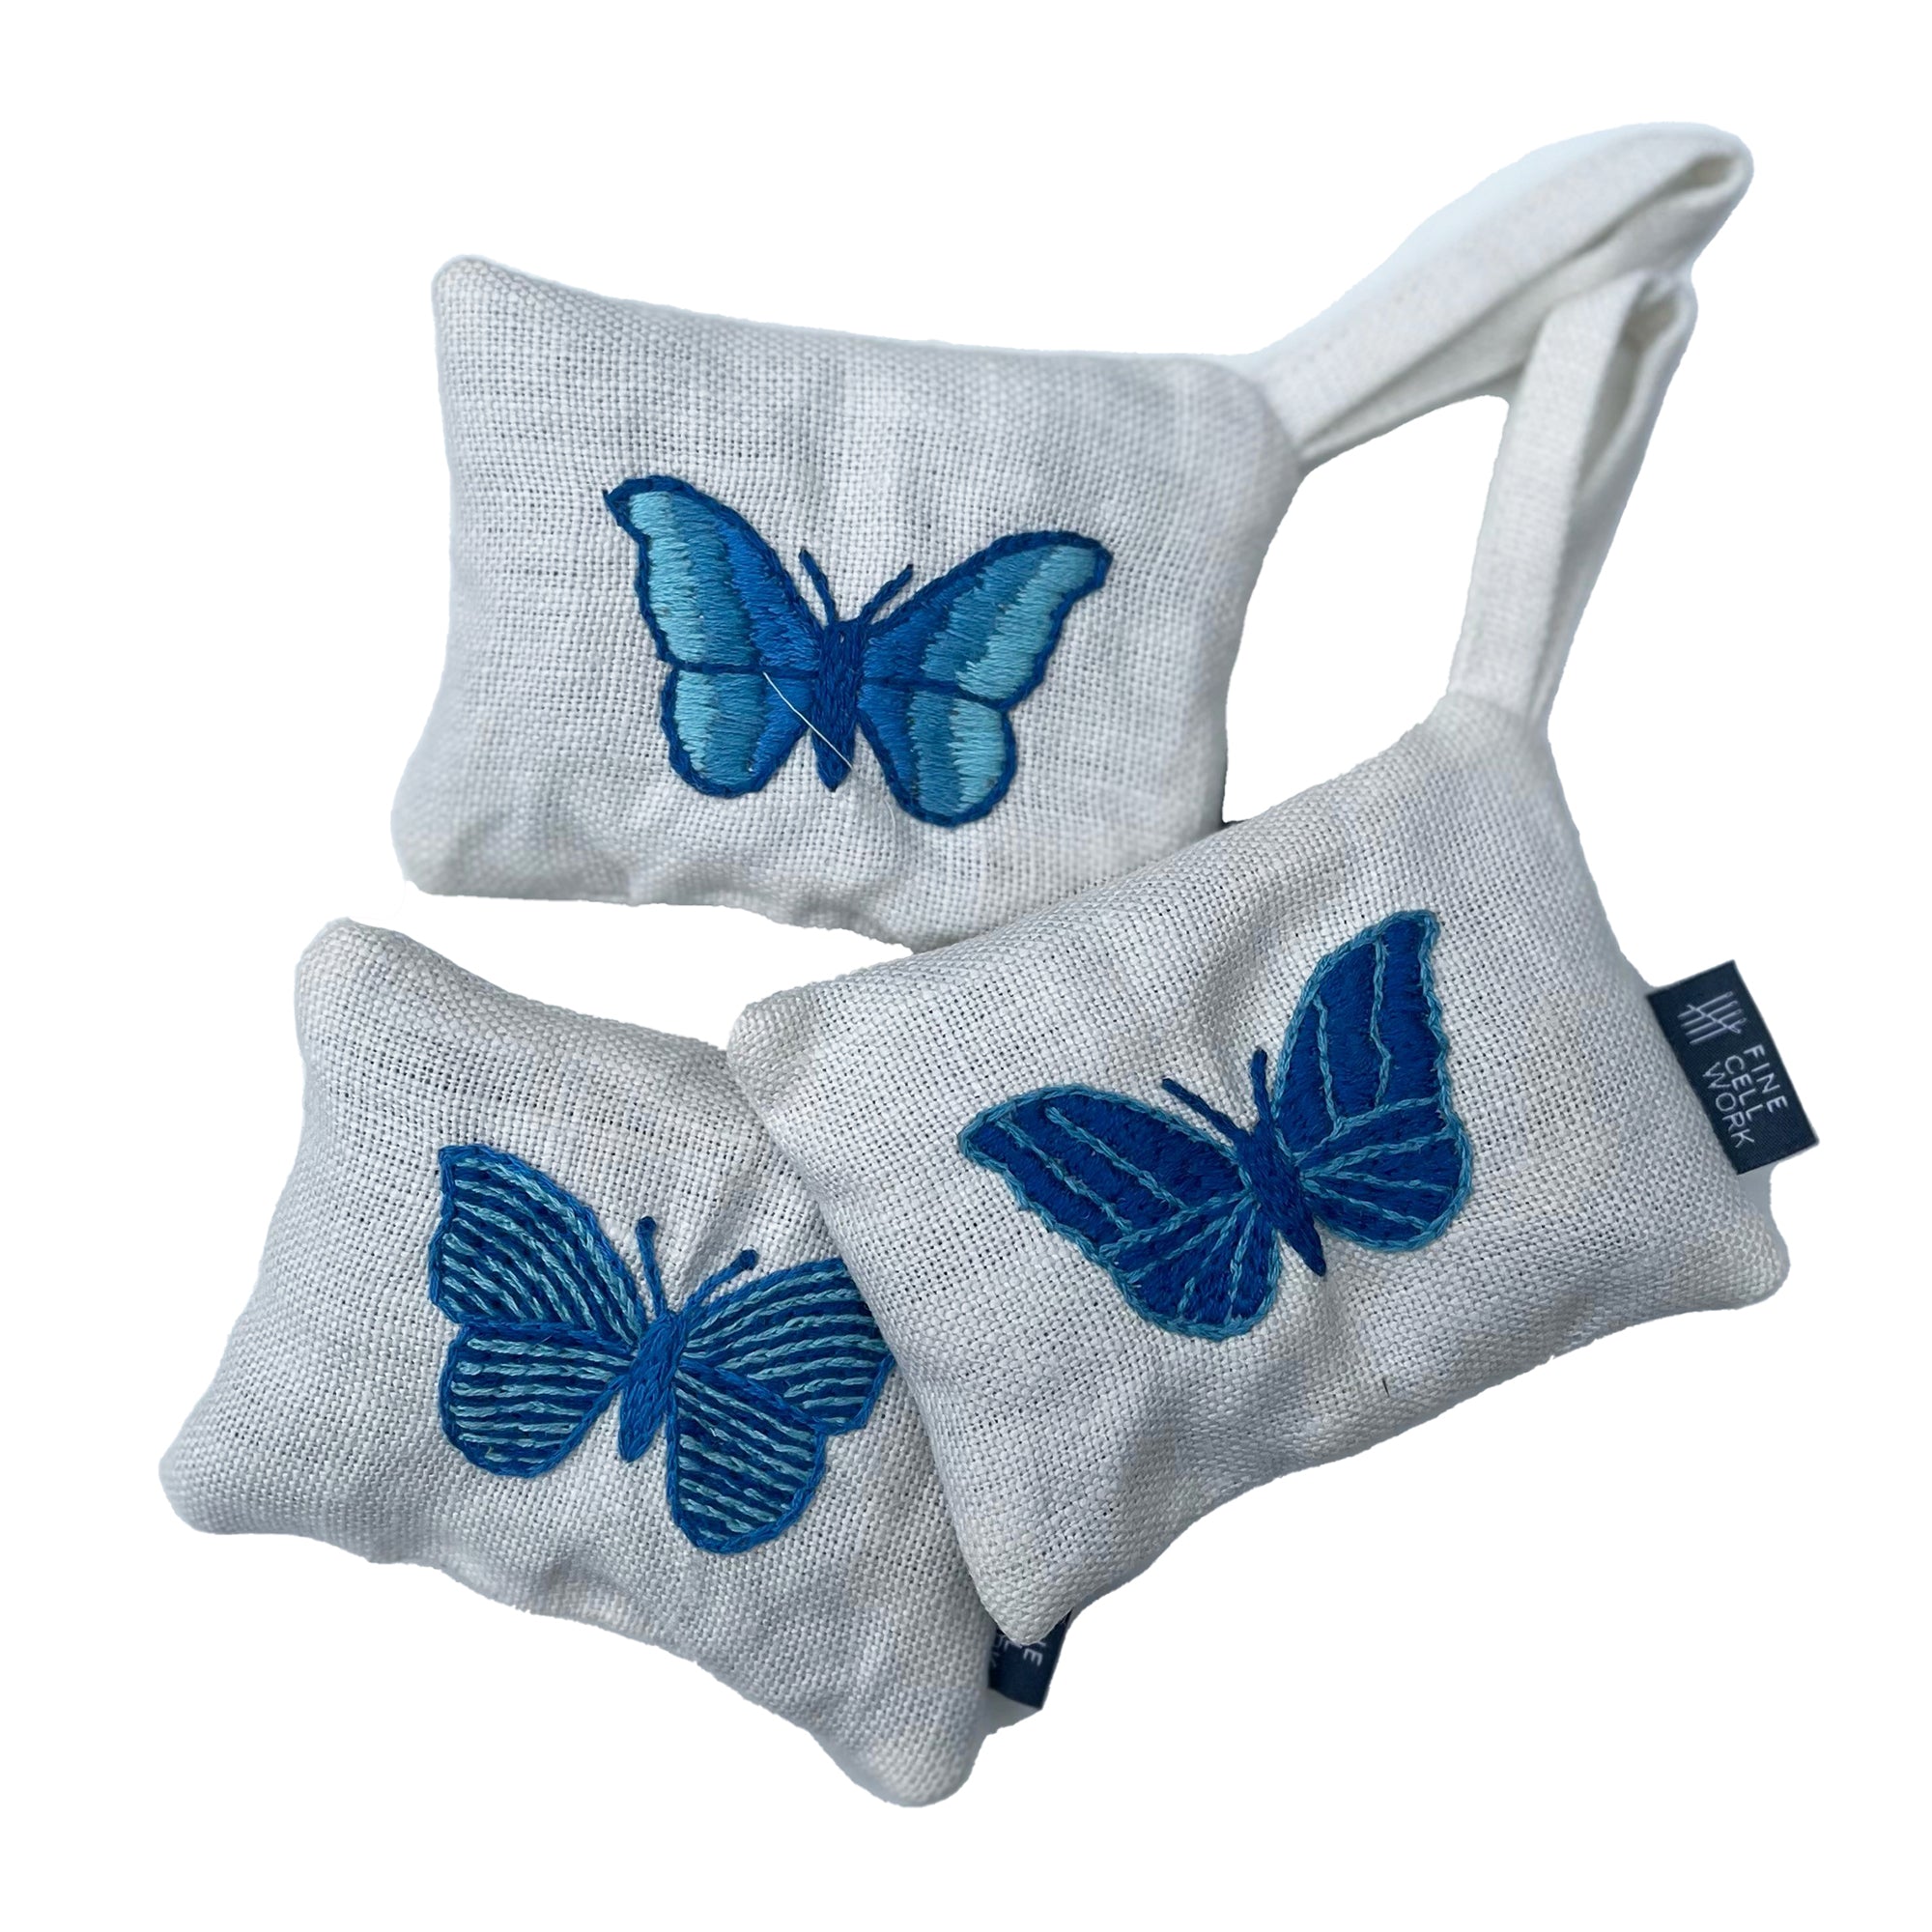 Butterfly Embroidered Lavender Bag Blue and Cream